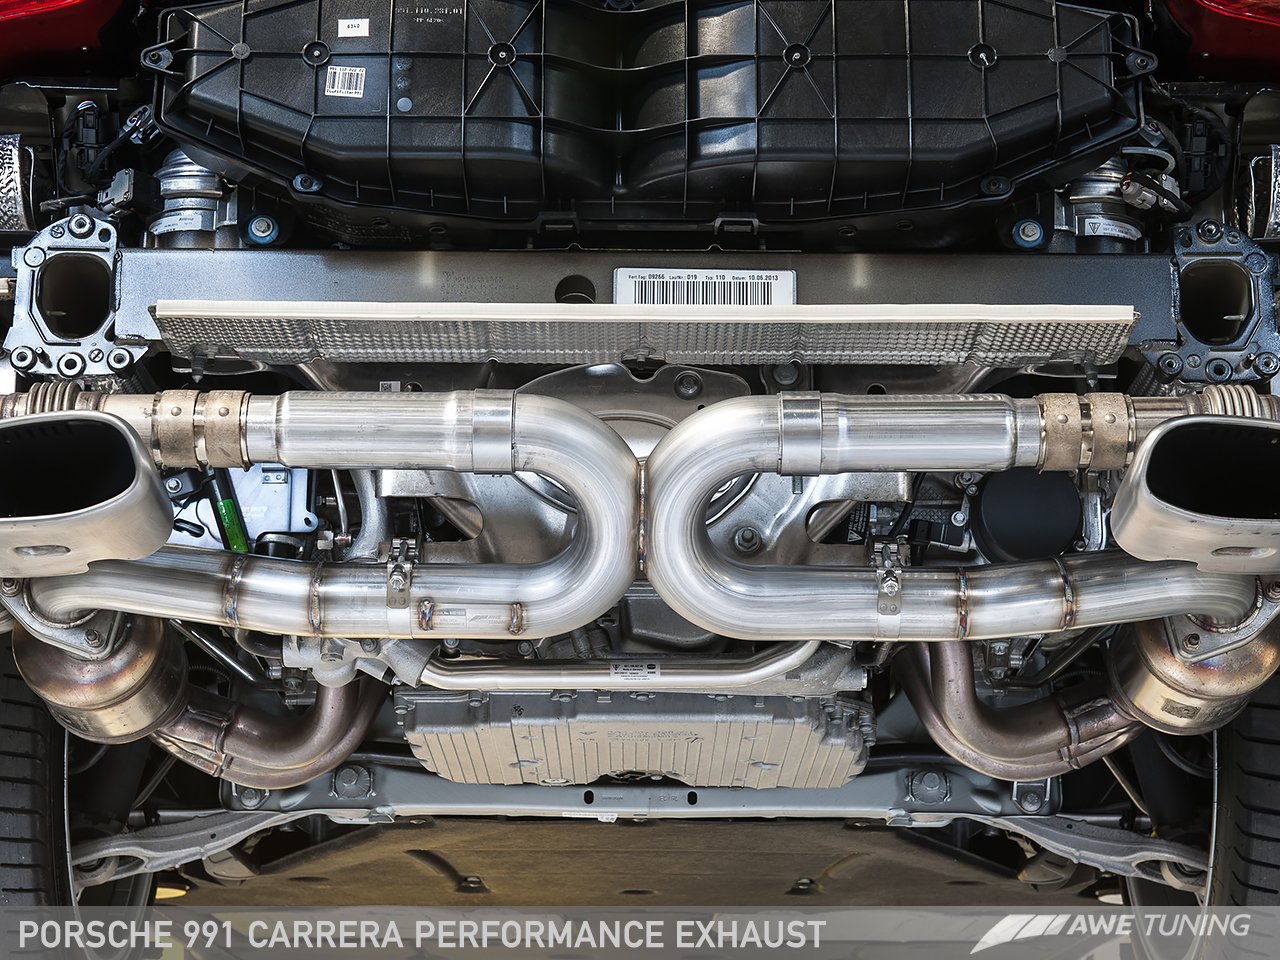 Performance Exhaust for 991 Carrera - Use Stock